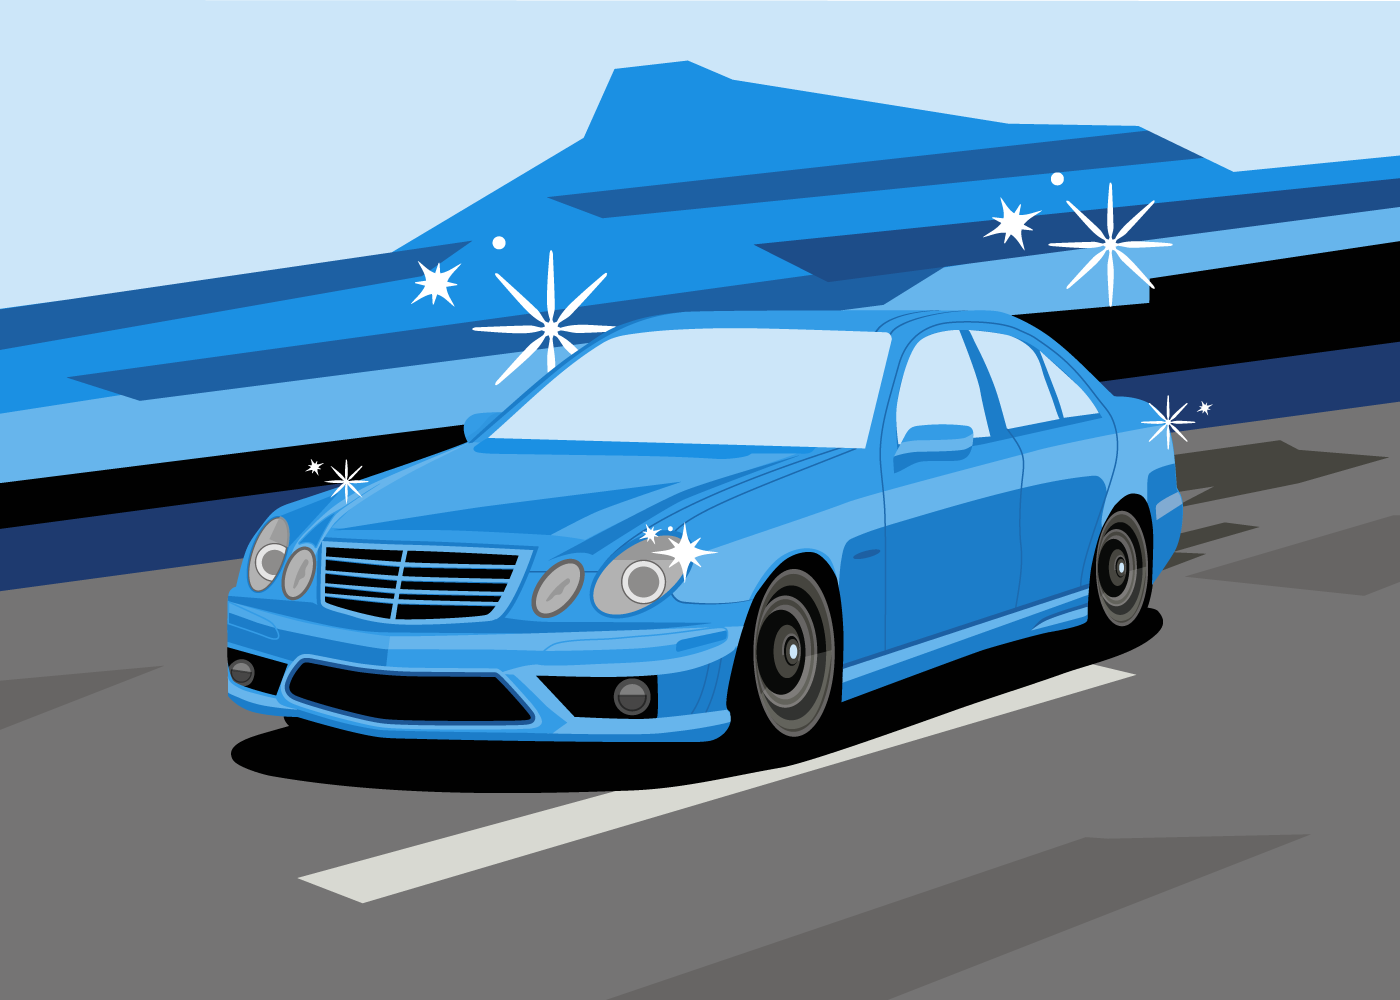 Illustration of a cheap luxury car driving down the road